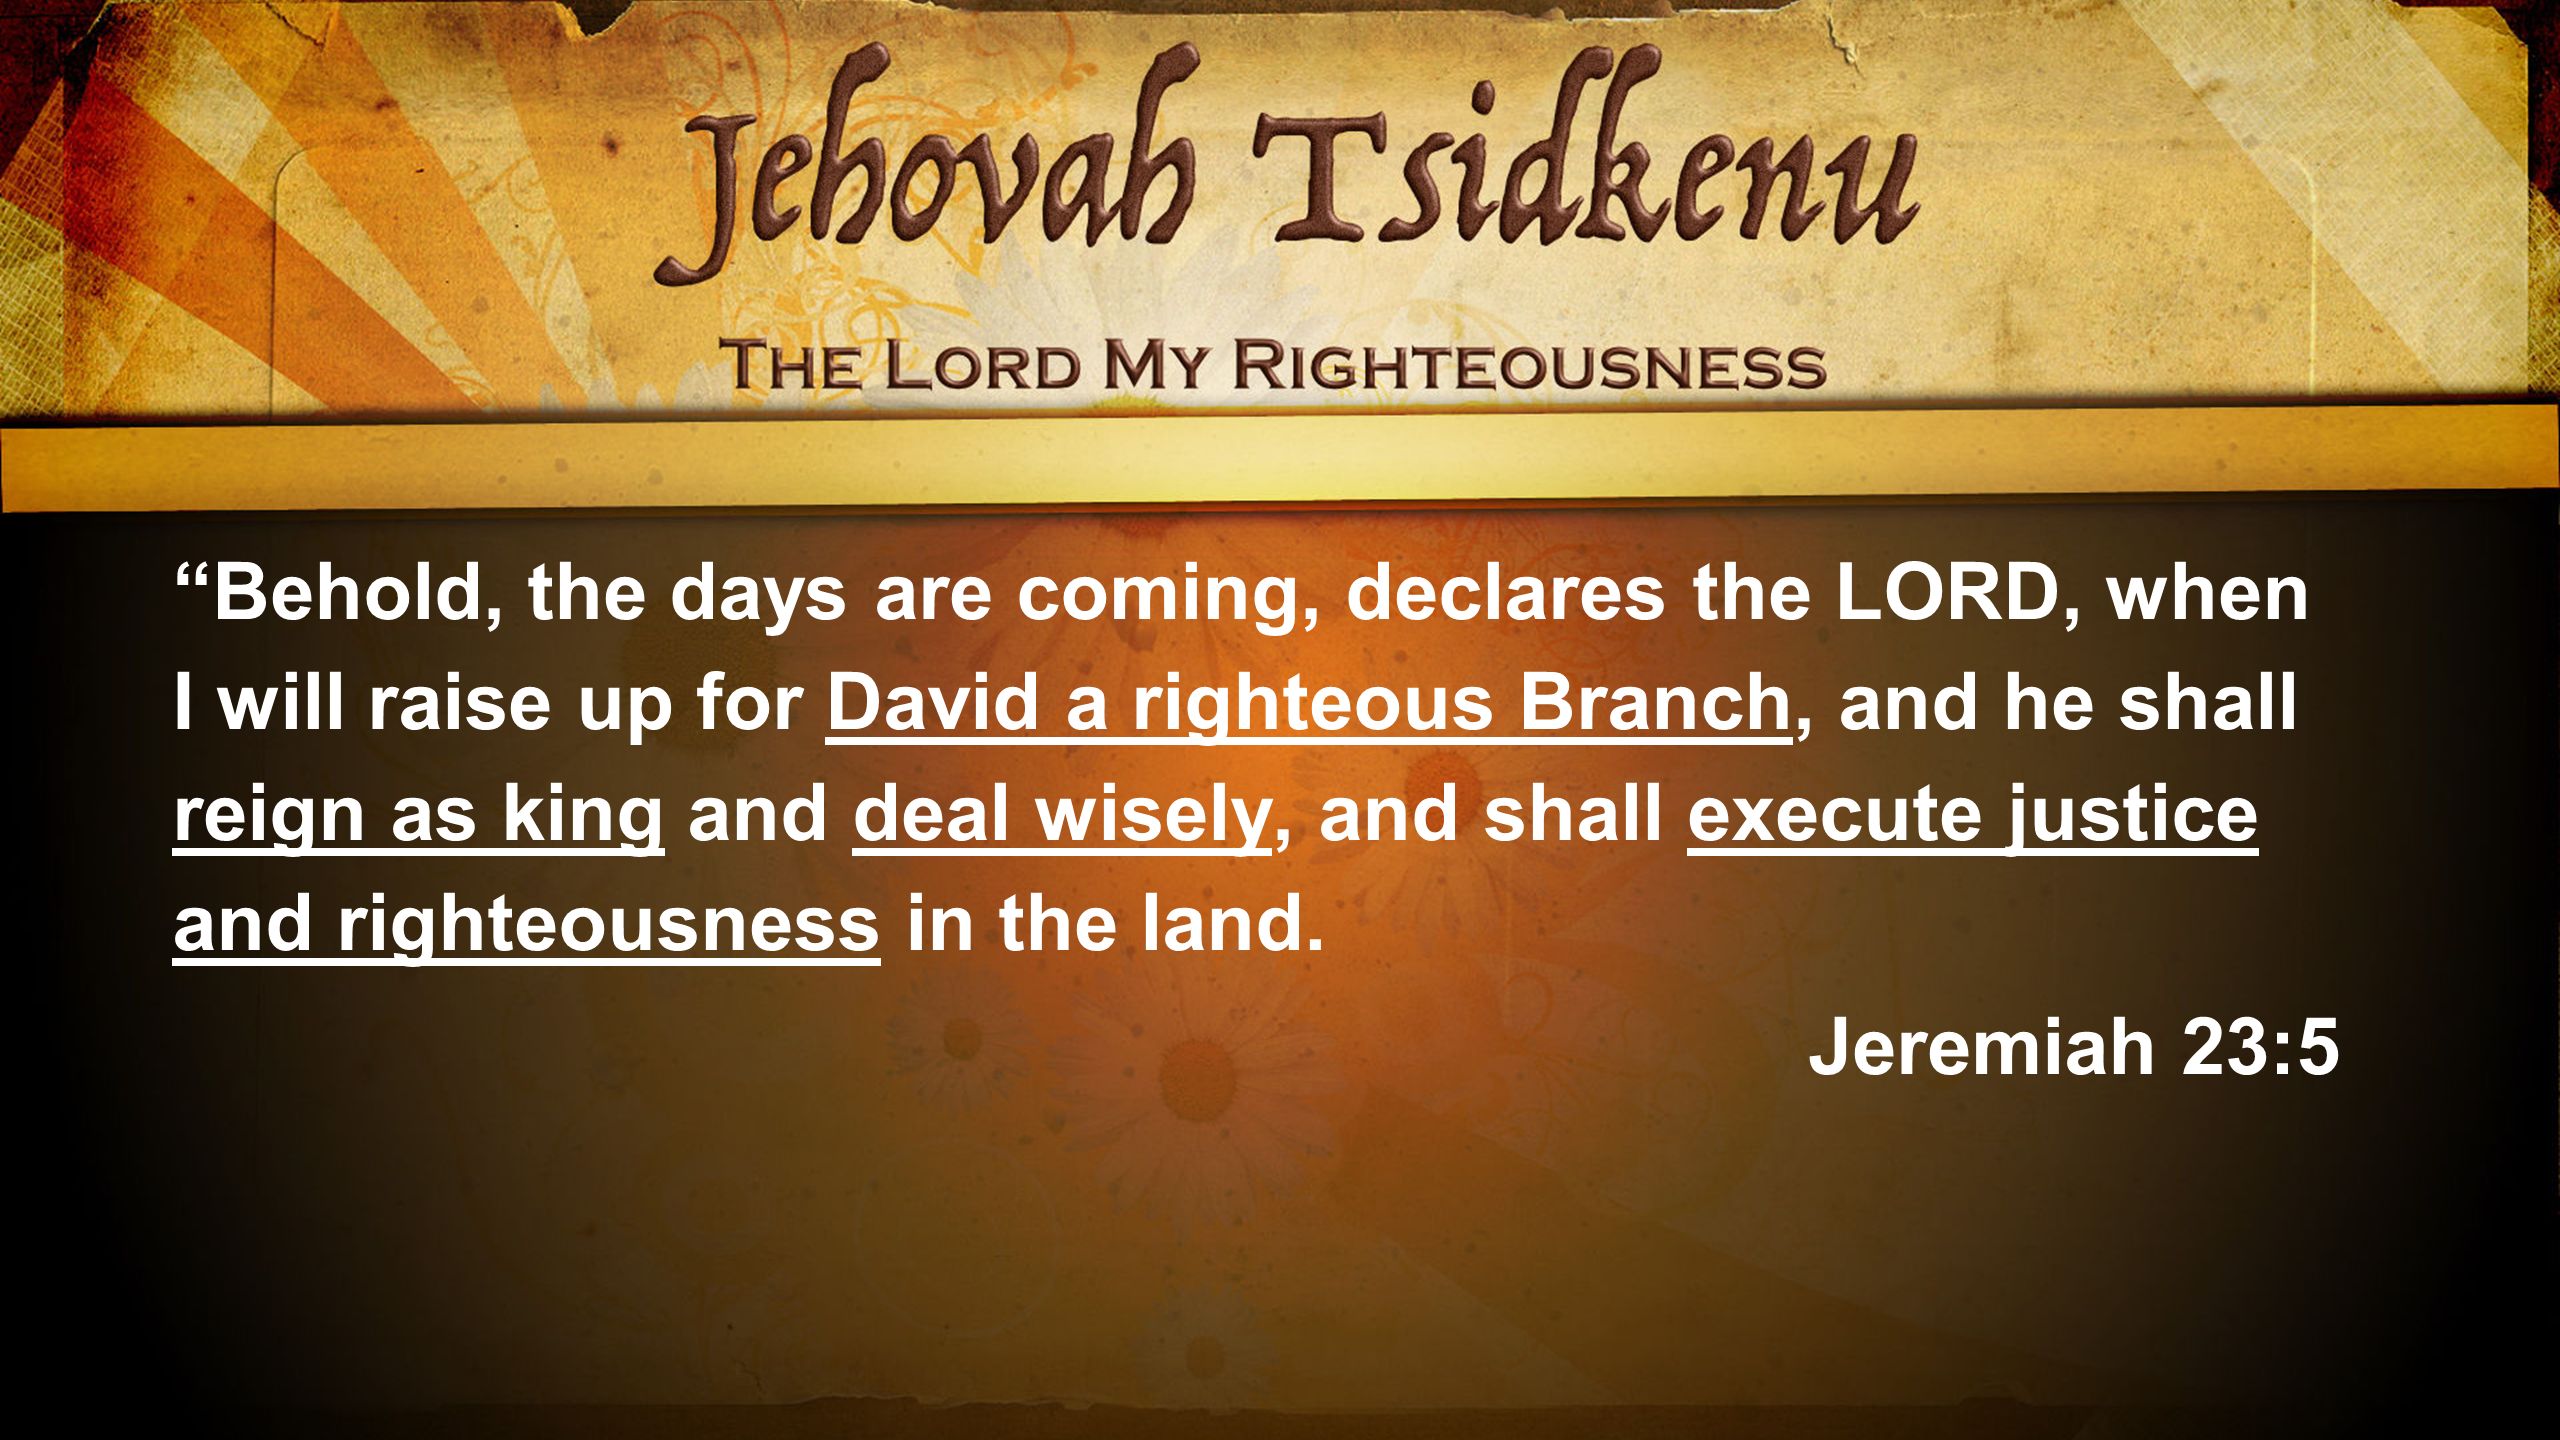 Behold, the days are coming, declares the LORD, when I will raise up for David a righteous Branch, and he shall reign as king and deal wisely, and shall execute justice and righteousness in the land.